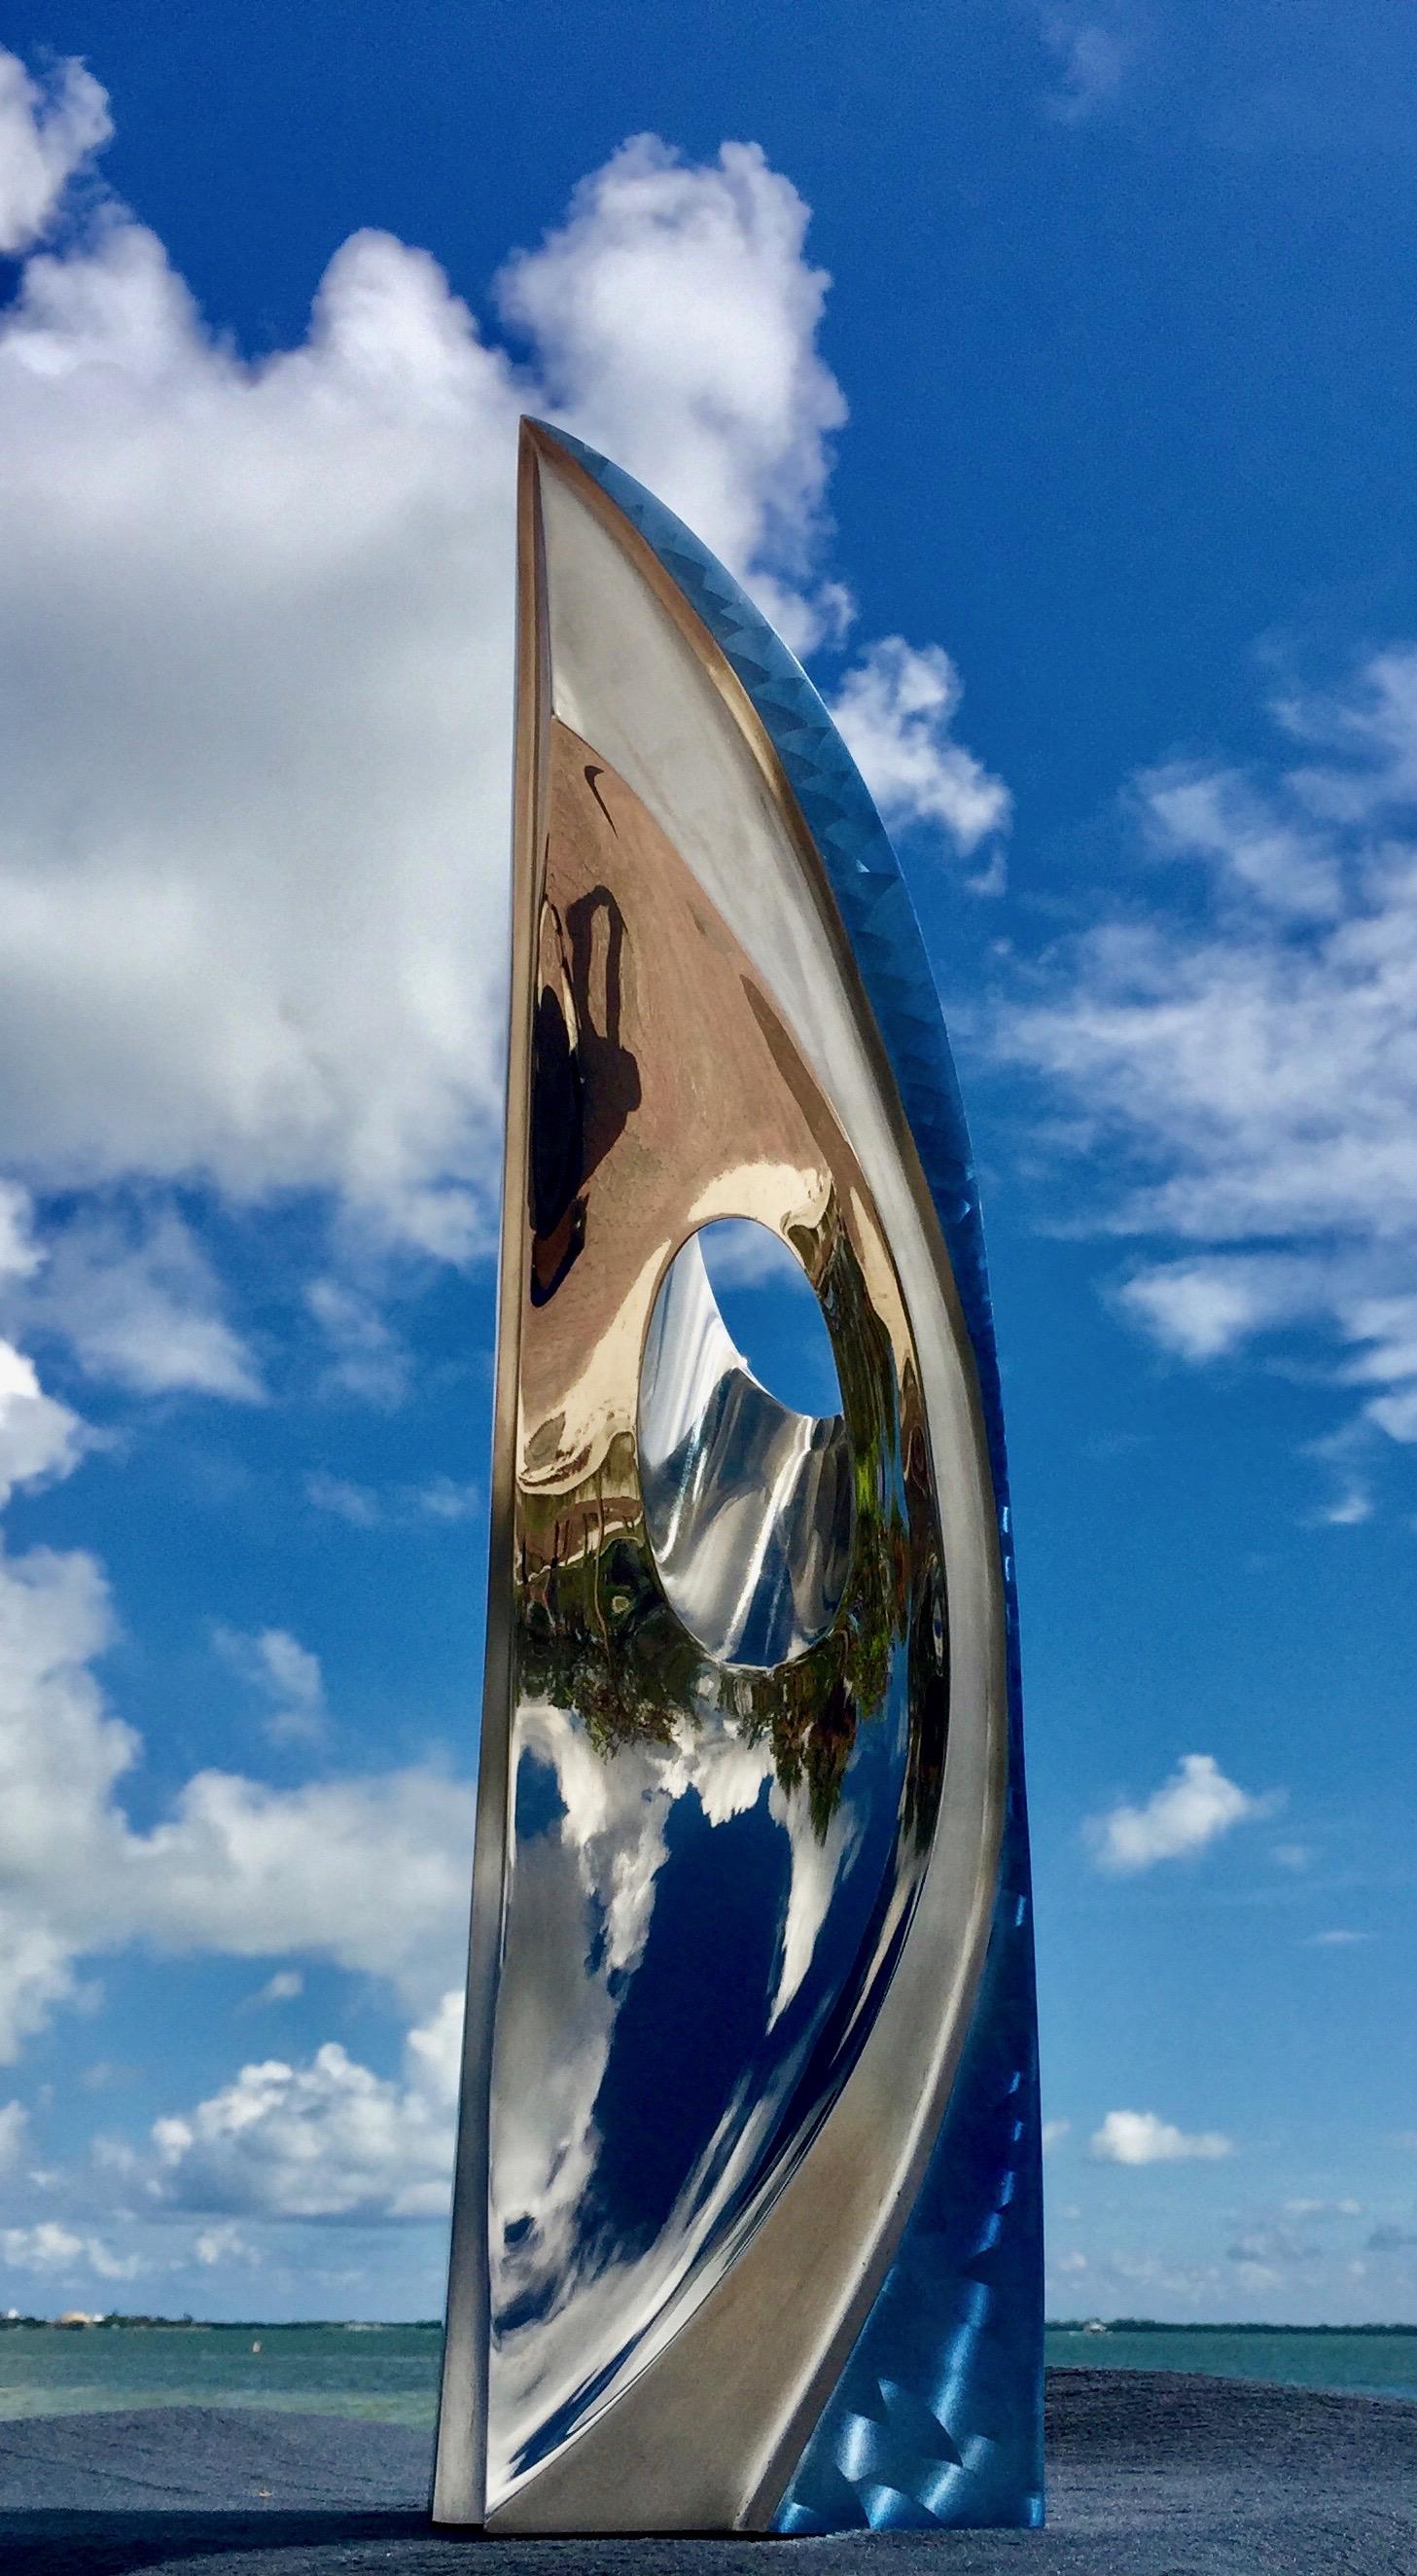 Marine outdoor Italian stainless steel. From this edition, there is one in the permanent collection of the CES University Museum in Columbia. 

This sculpture will be shipped directly from the artist's studio.